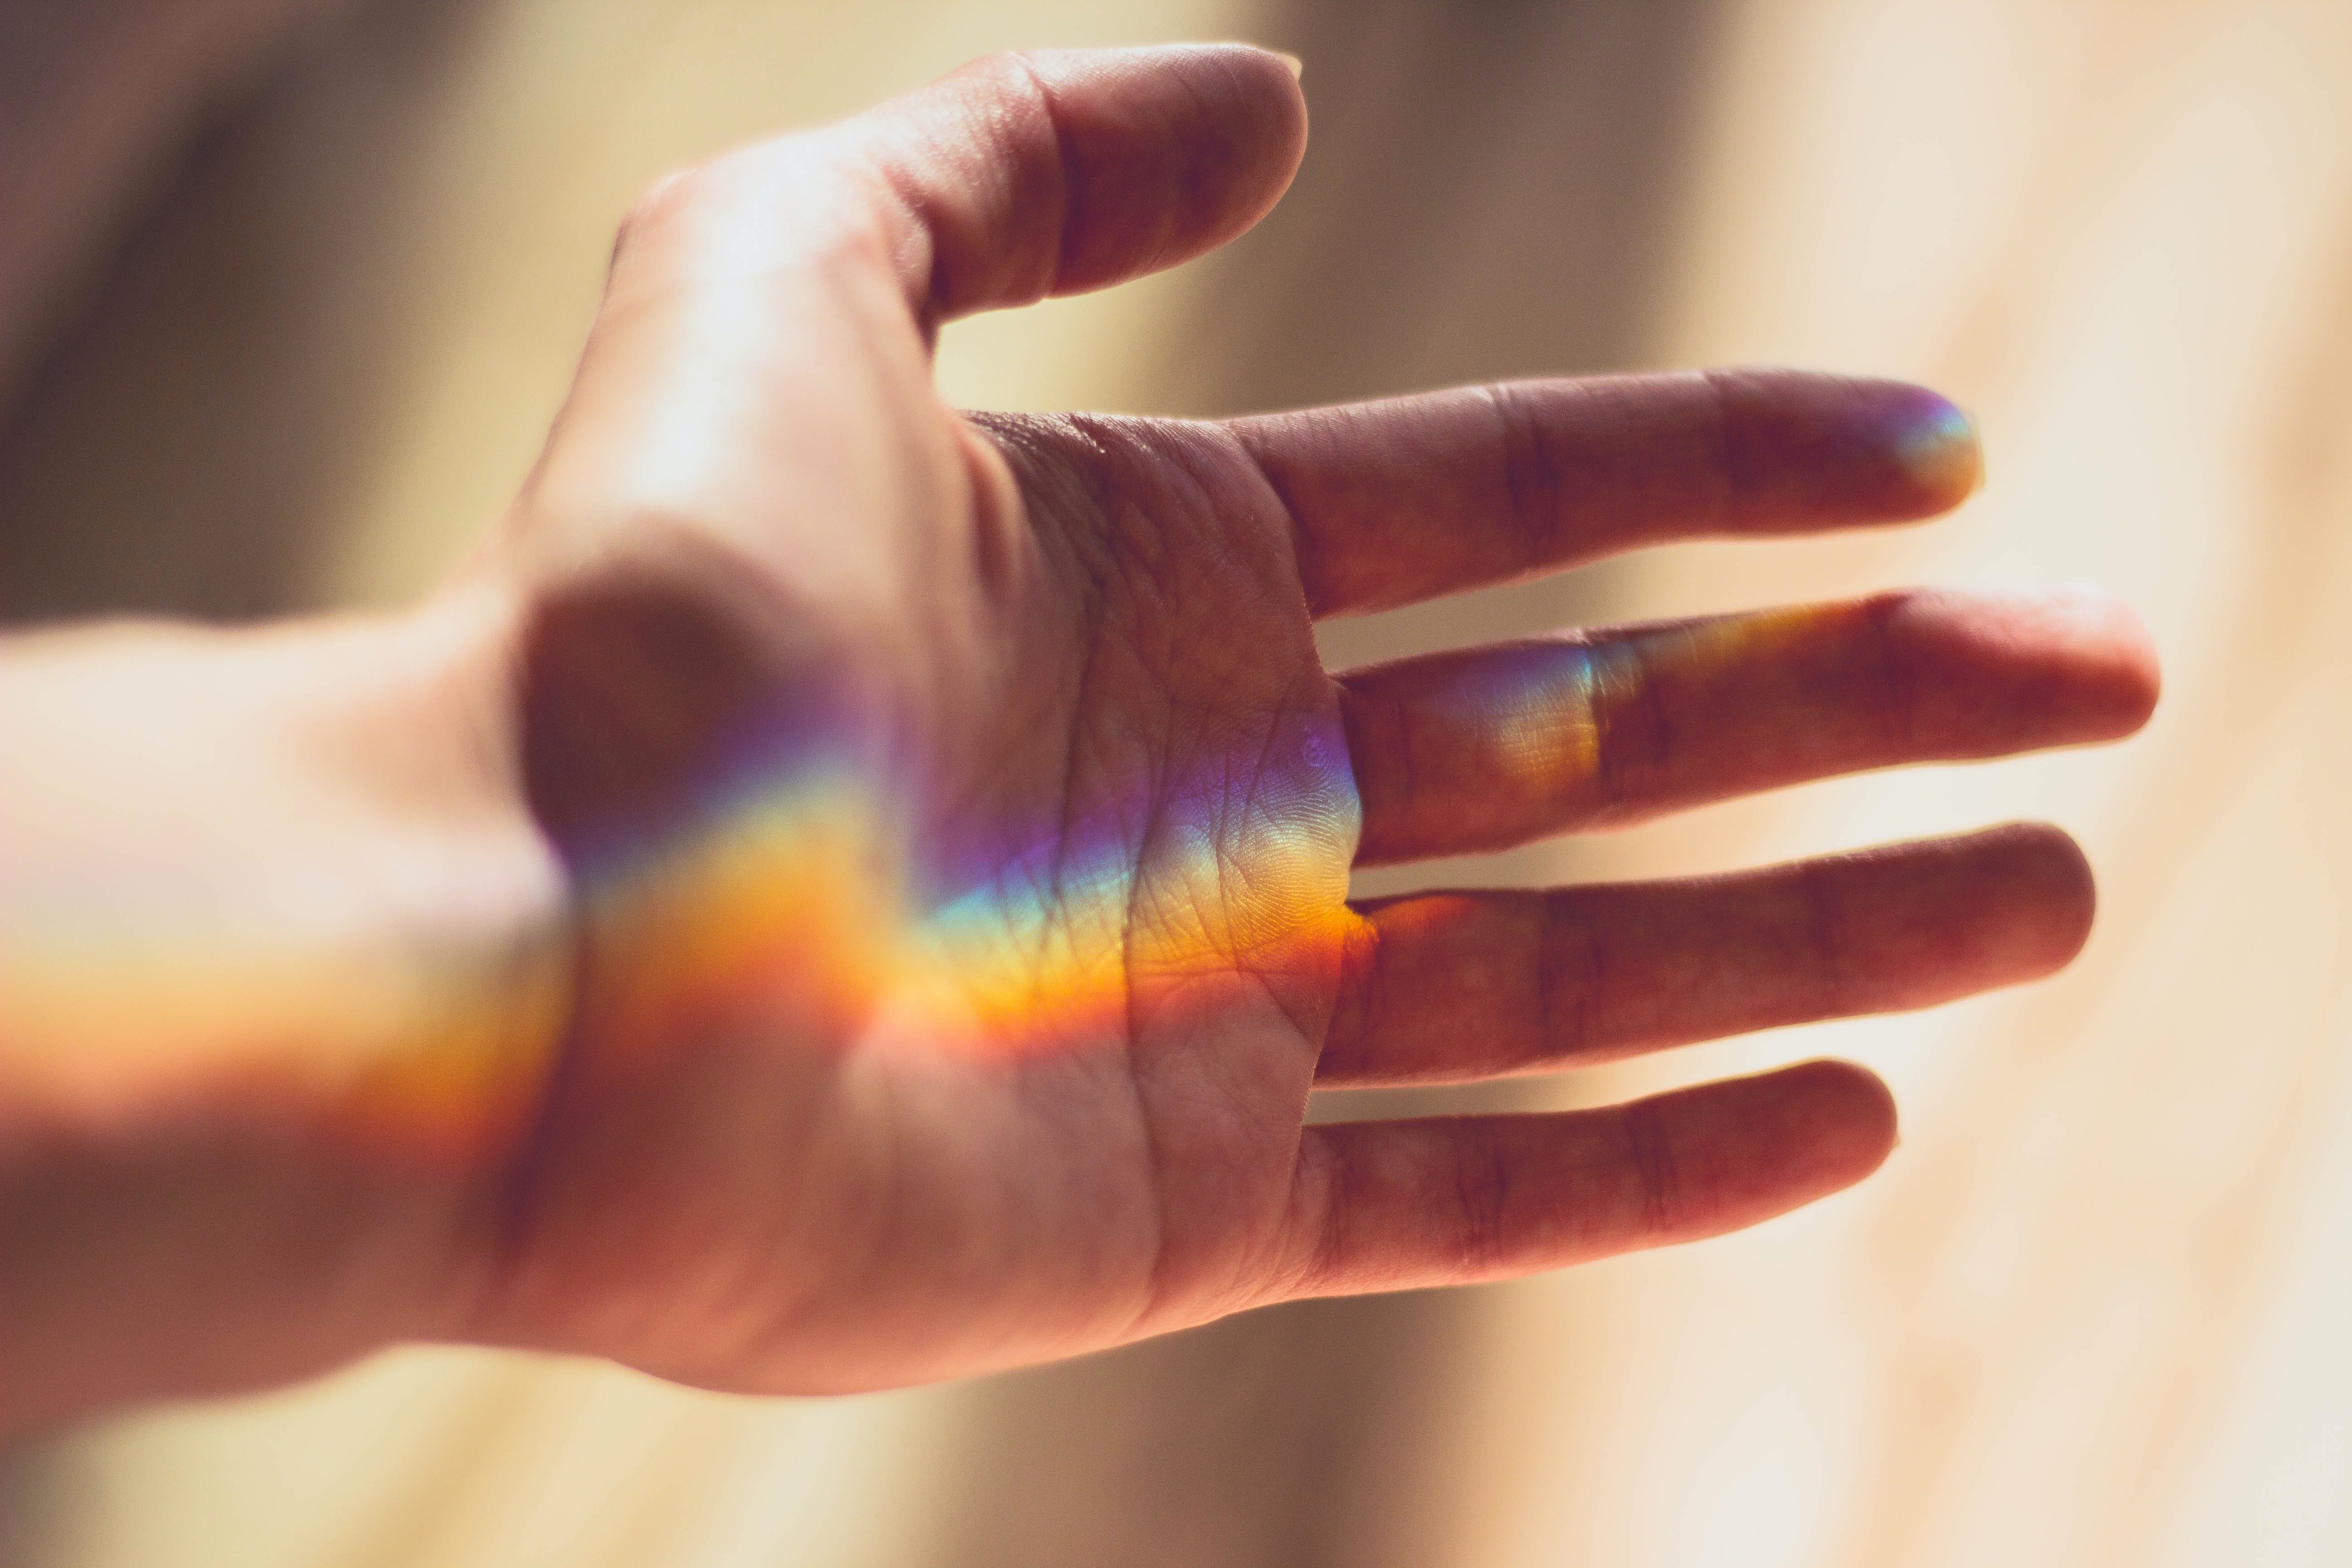 Joe was delighted to see a rainbow when he woke up the next day. | Source: Pexels